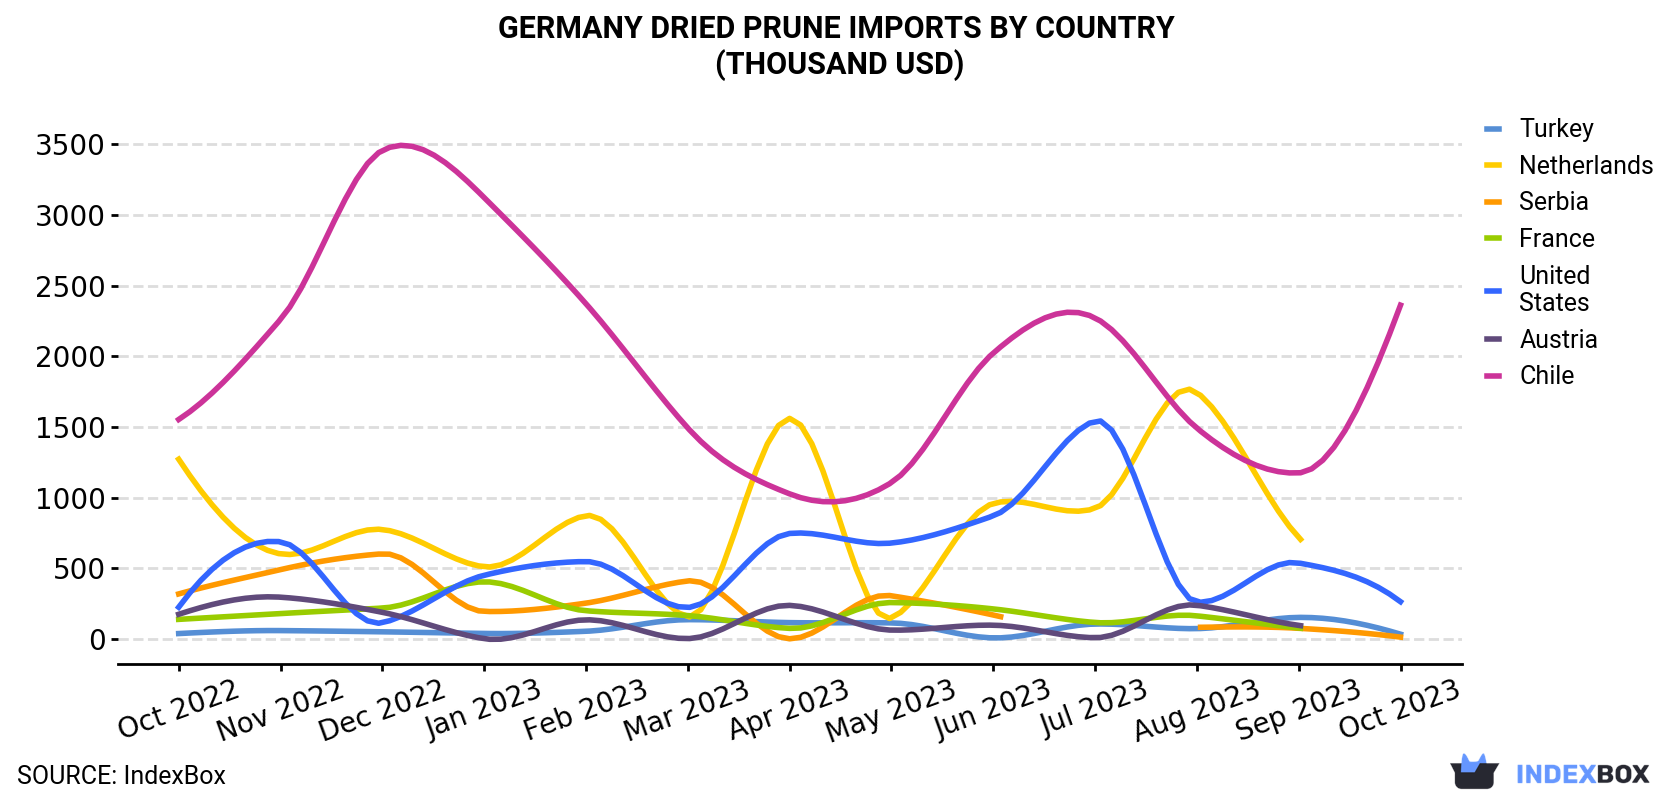 Germany Dried Prune Imports By Country (Thousand USD)